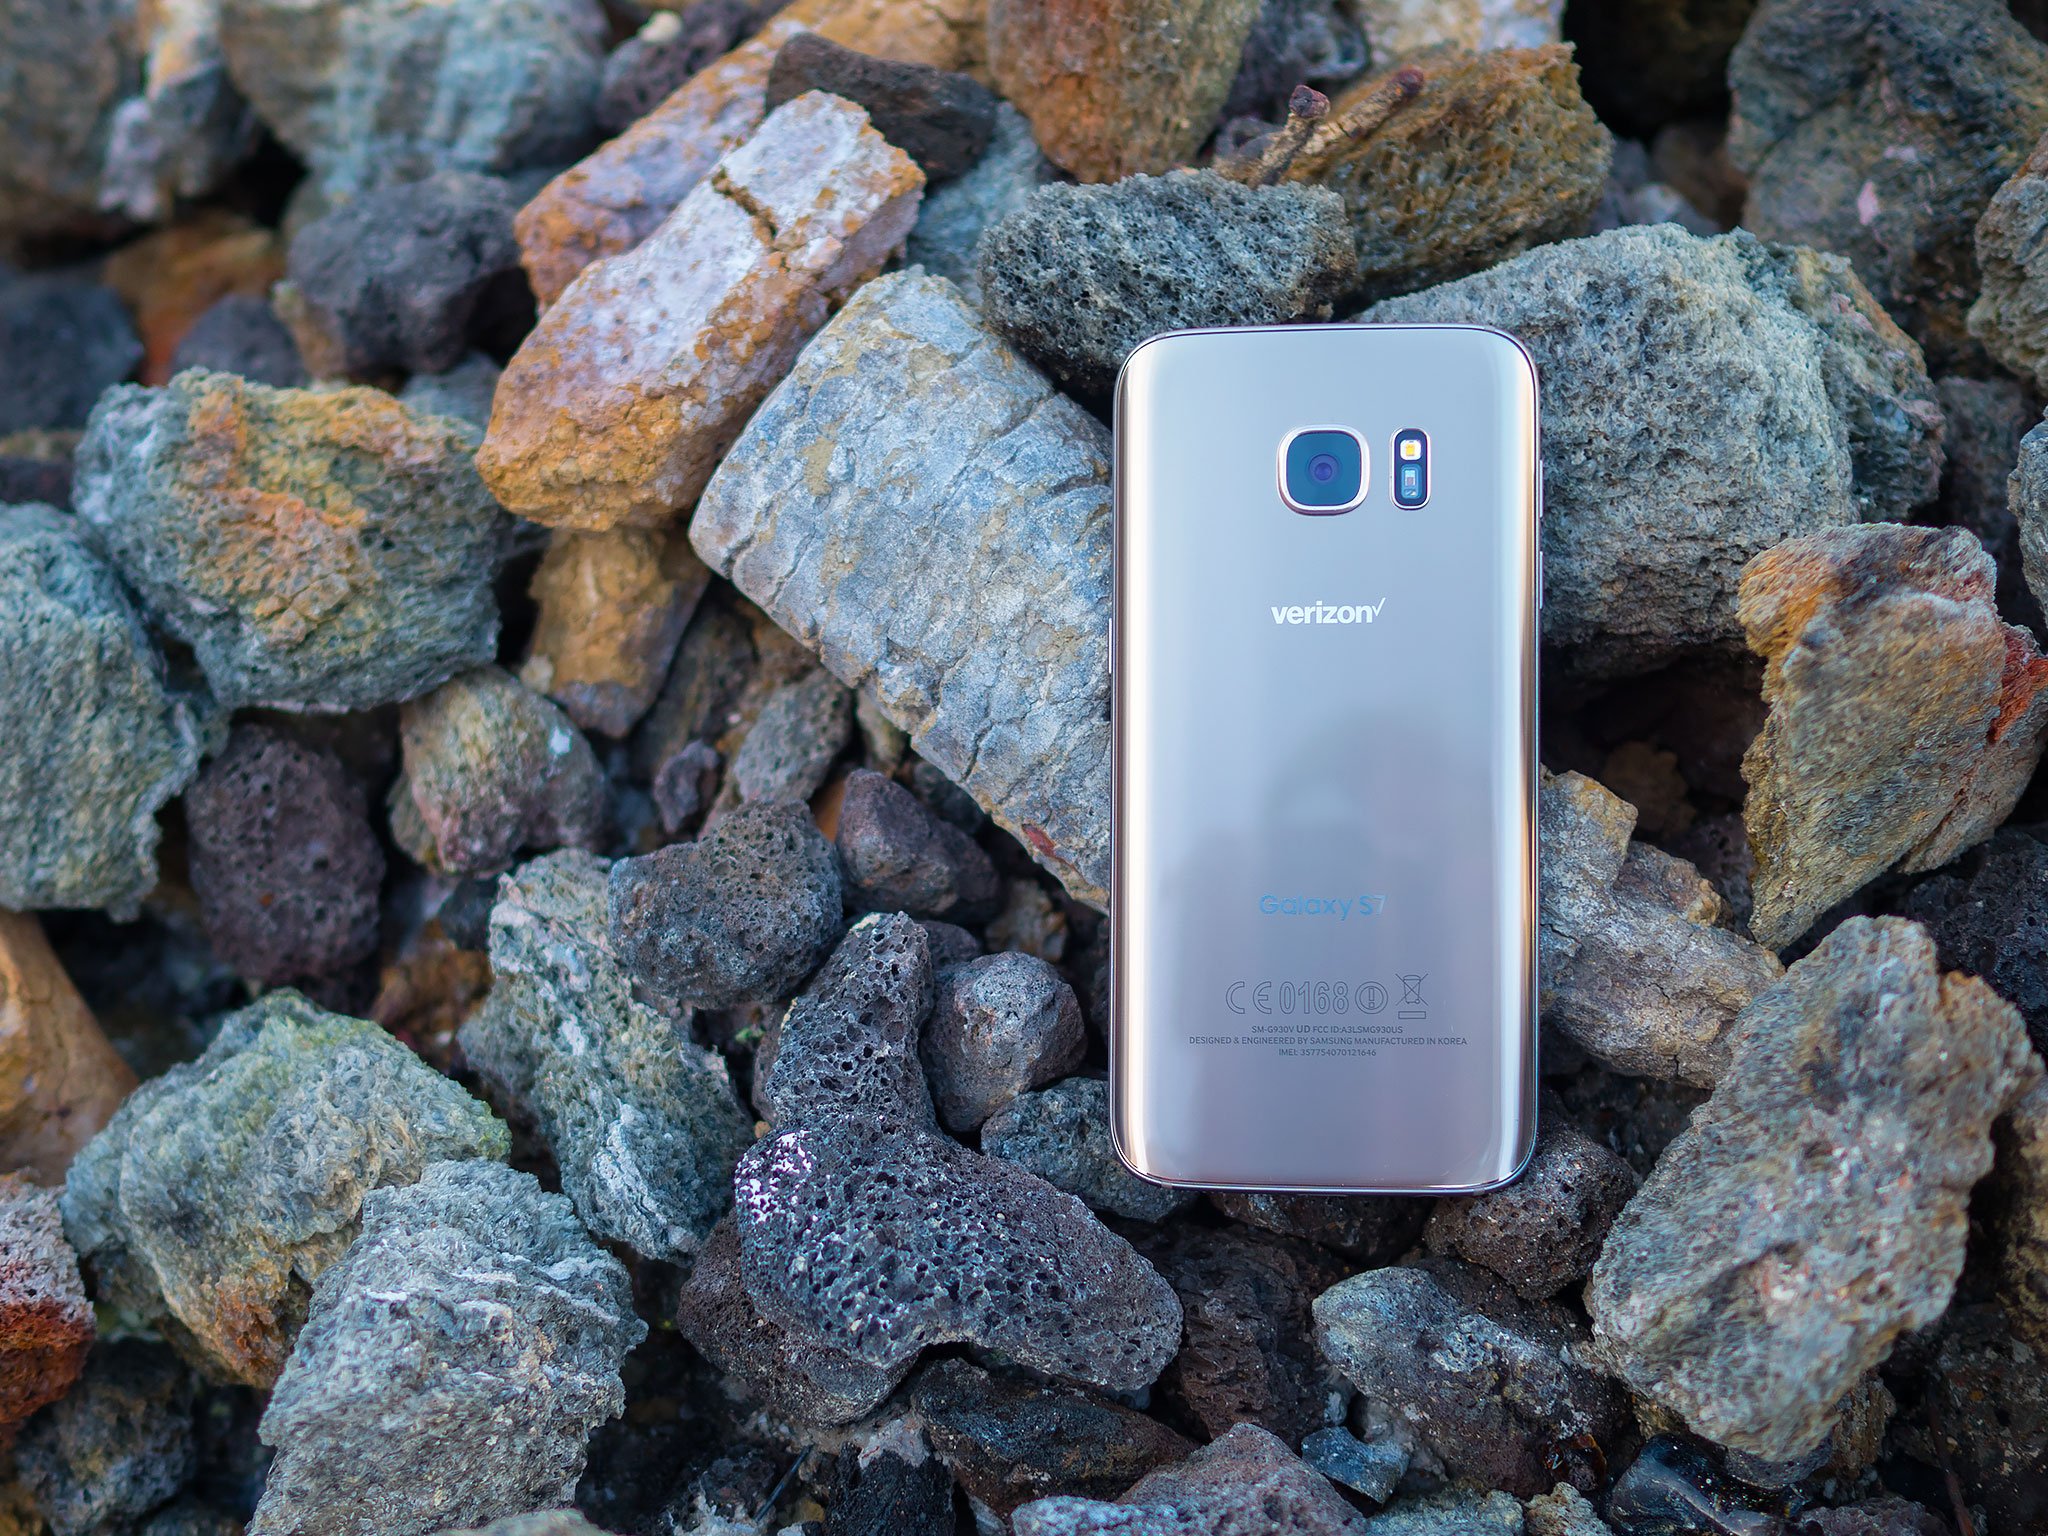 Samsung Galaxy S7 review: This is the phone to beat - CNET